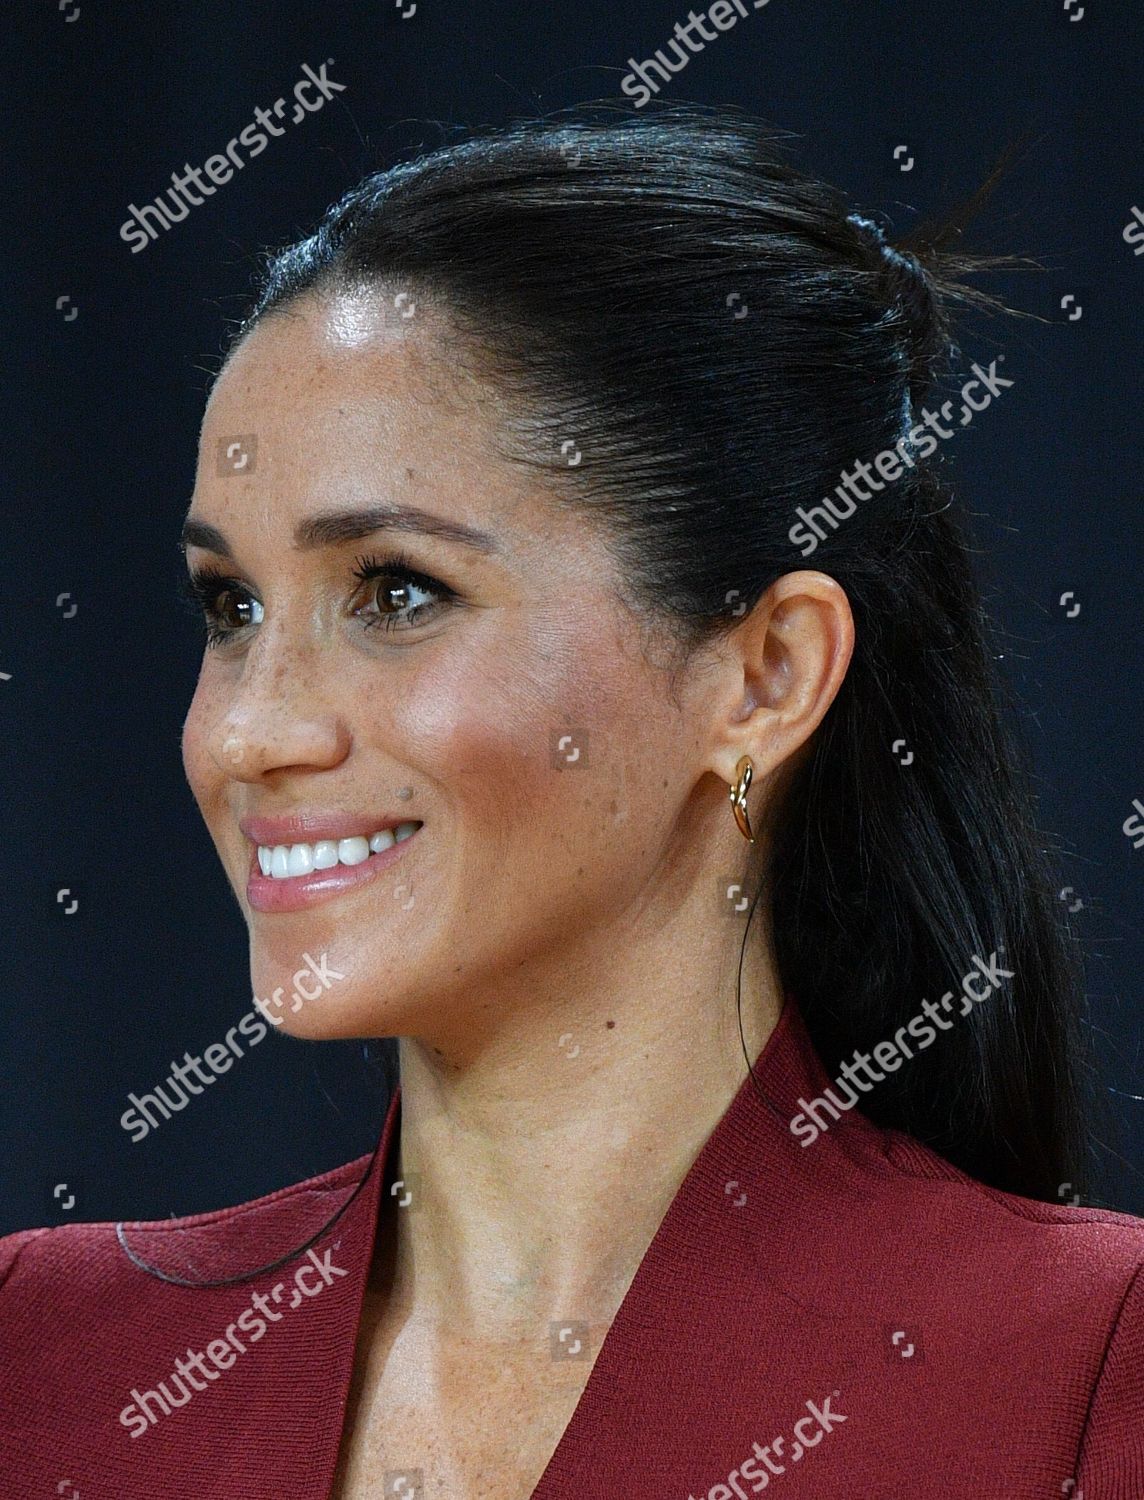 prince-harry-and-meghan-duchess-of-sussex-tour-of-australia-shutterstock-editorial-9946006bg.jpg